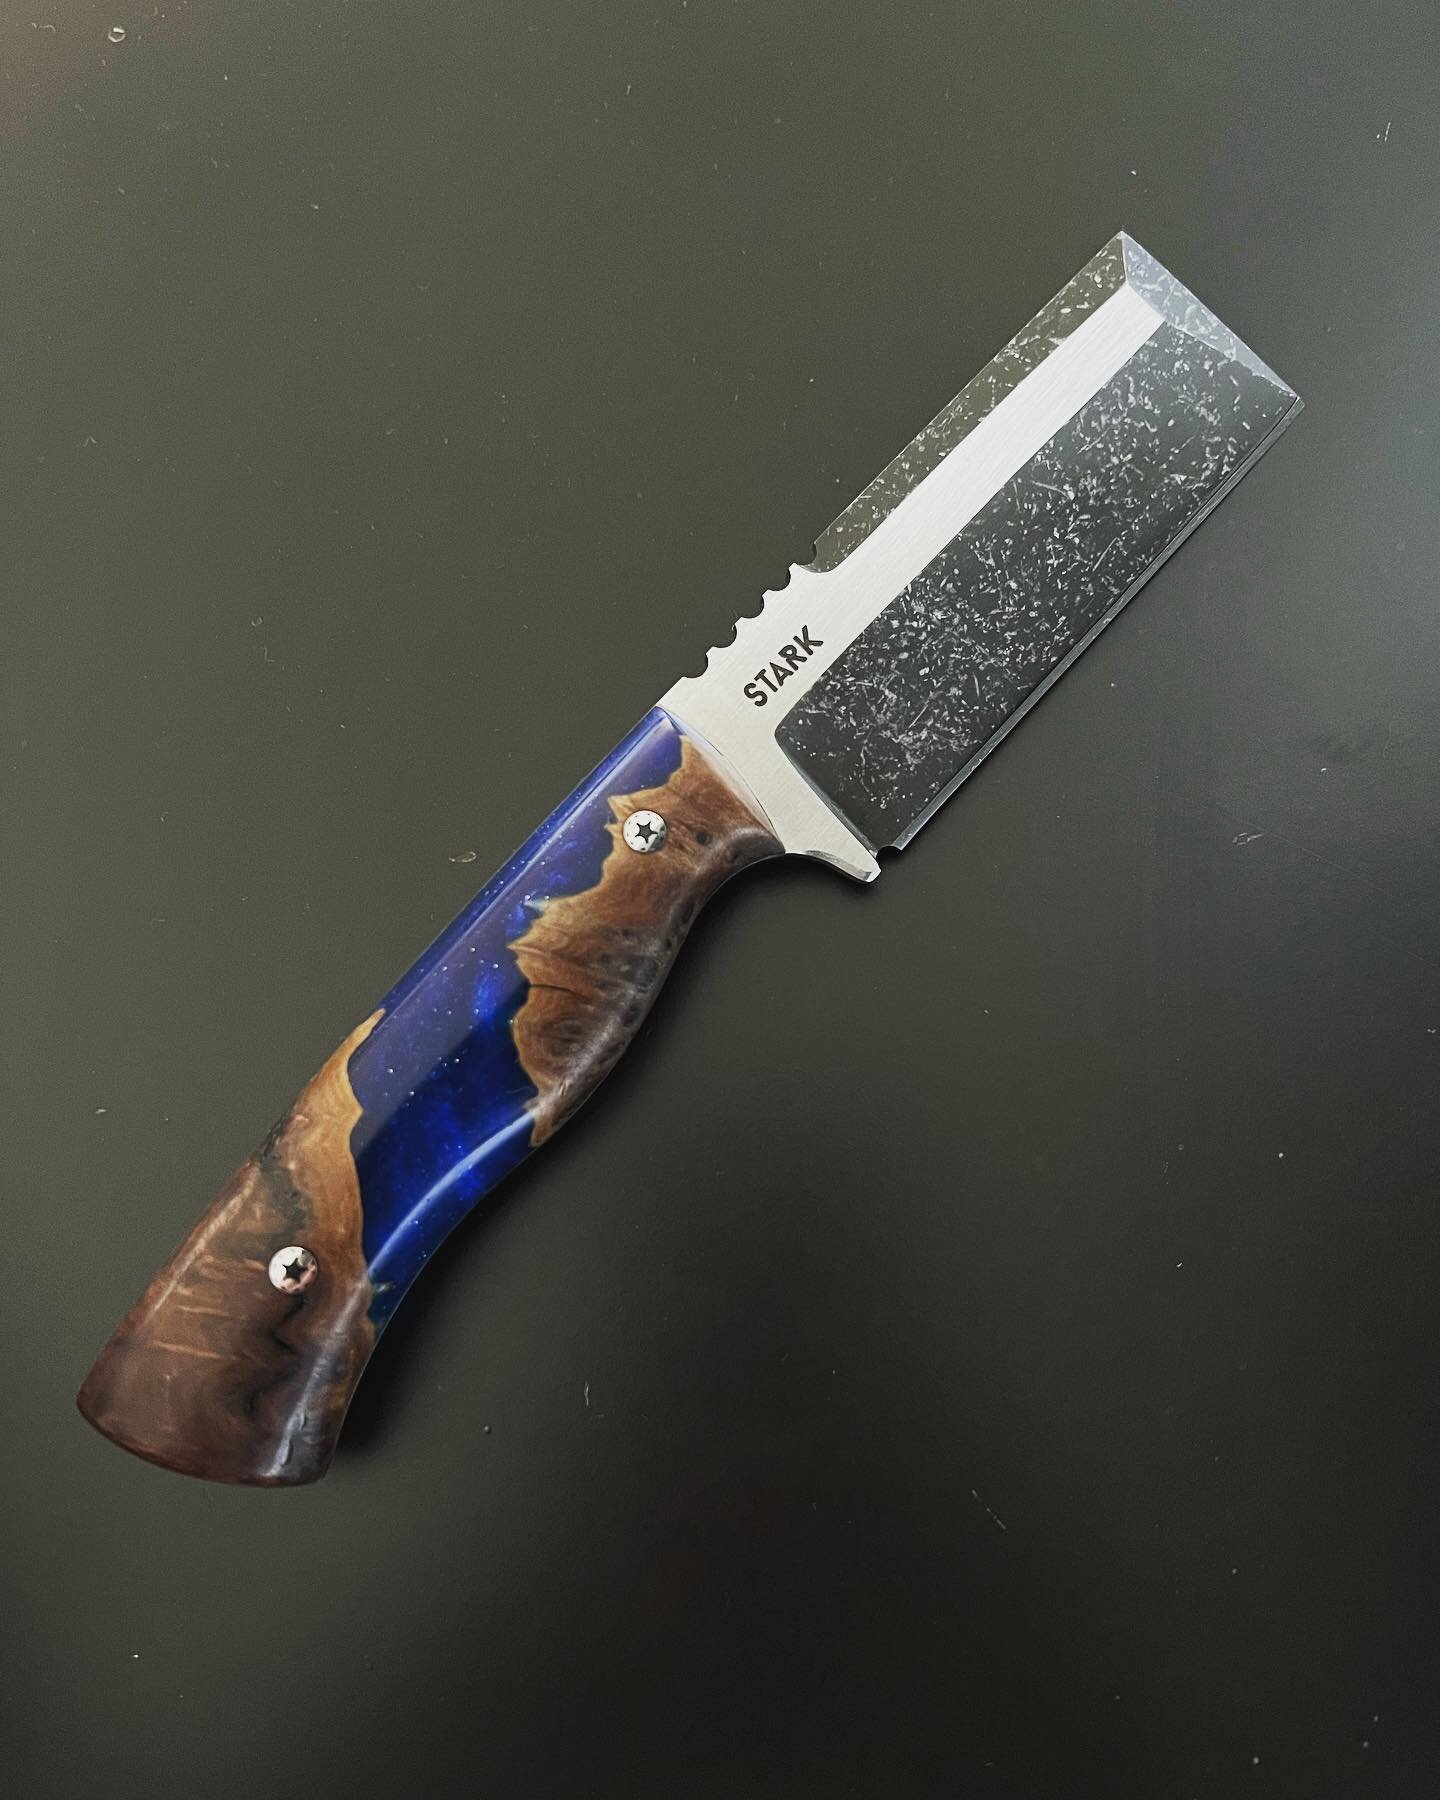 Latest custom order just finished up! This is an EDC Cleaver with galaxy blue resin and mallee burl, which turned out super nicely. Shoot me a message if you&rsquo;d like to get a spot on the list for a custom order or have any questions!